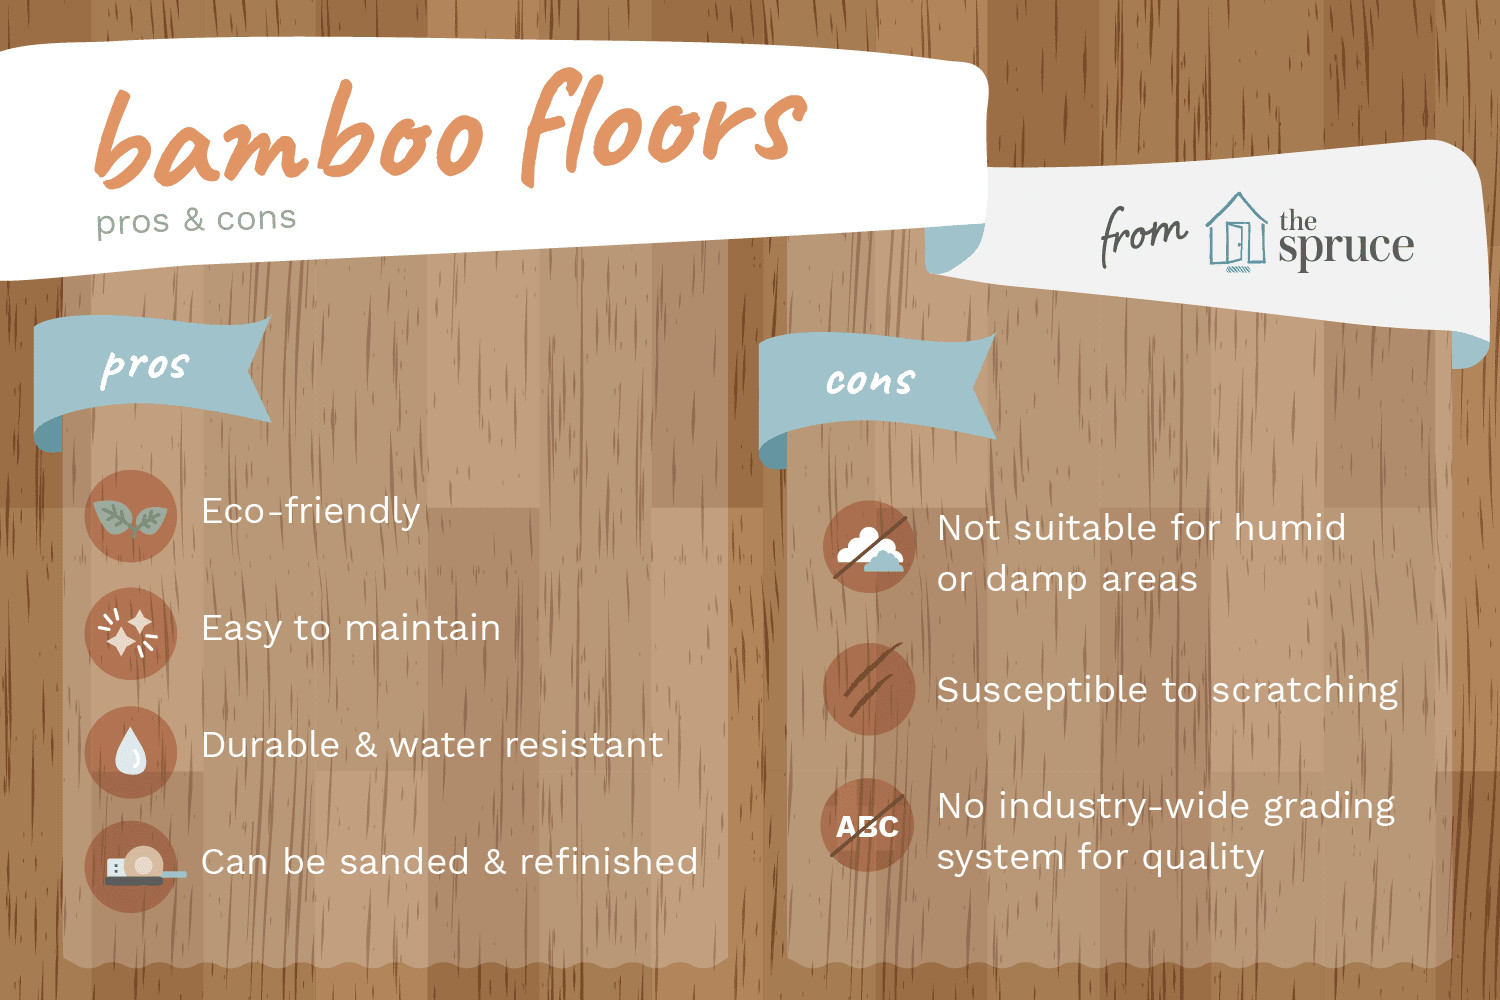 11 Stylish How Much Does Refinishing A Hardwood Floor Cost 2024 free download how much does refinishing a hardwood floor cost of the advantages and disadvantages of bamboo flooring within benefits and drawbacks of bamboo floors 1314694 v3 5b102fccff1b780036c0a4fa